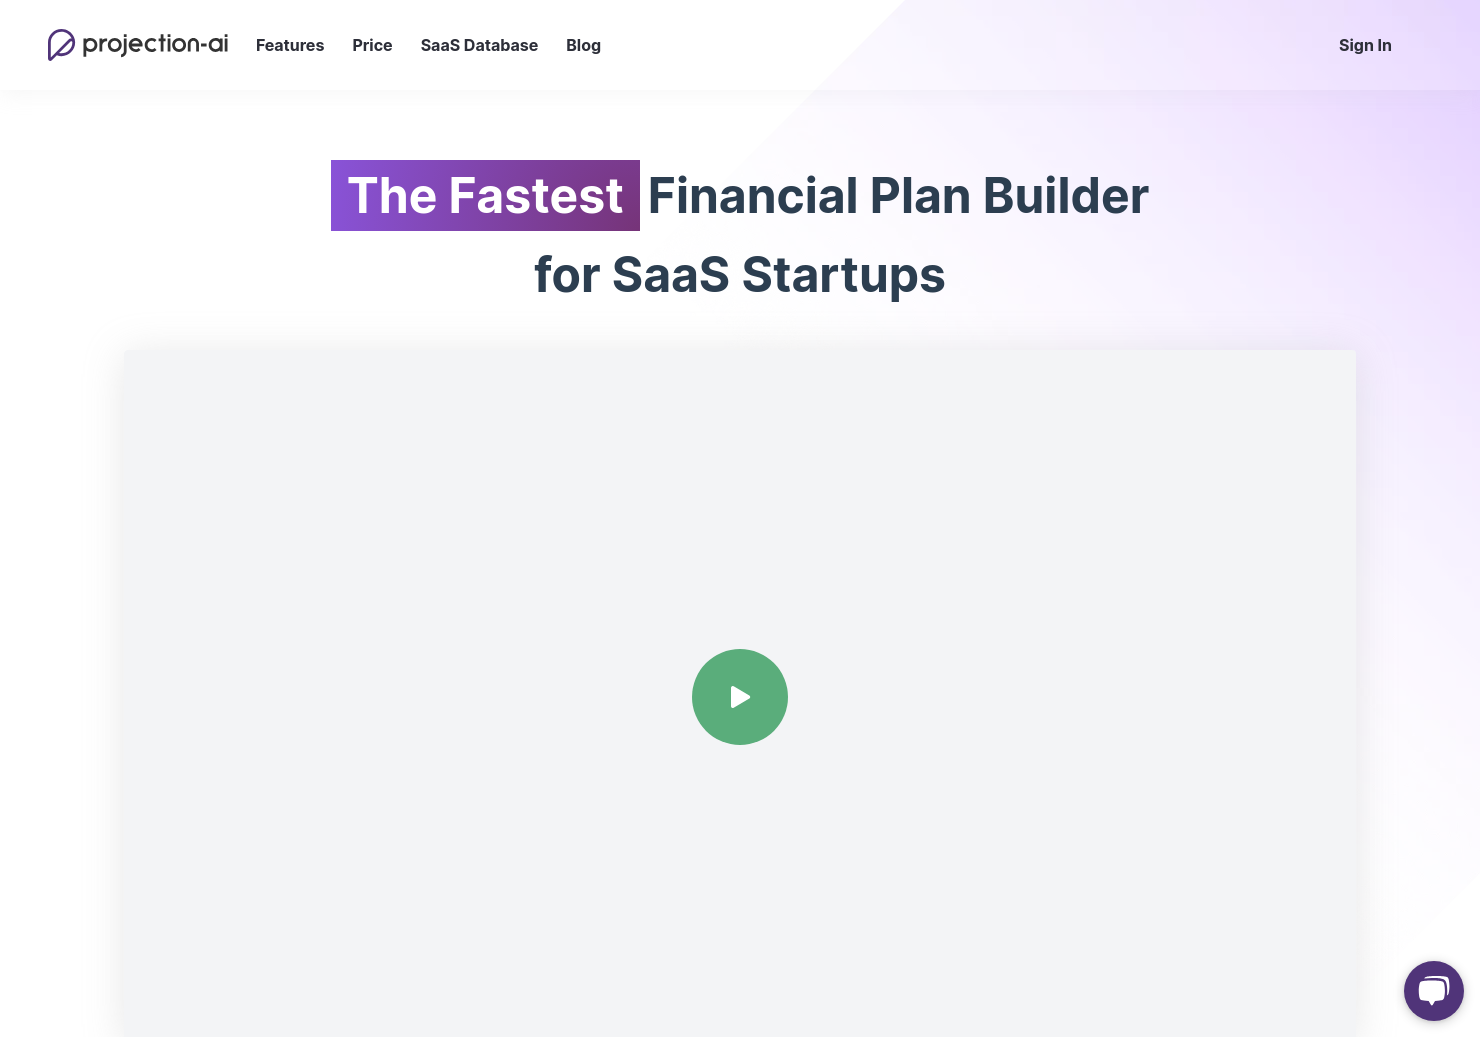 startuptile projection-ai-The Fastest Financial Modeling tool for SaaS startups